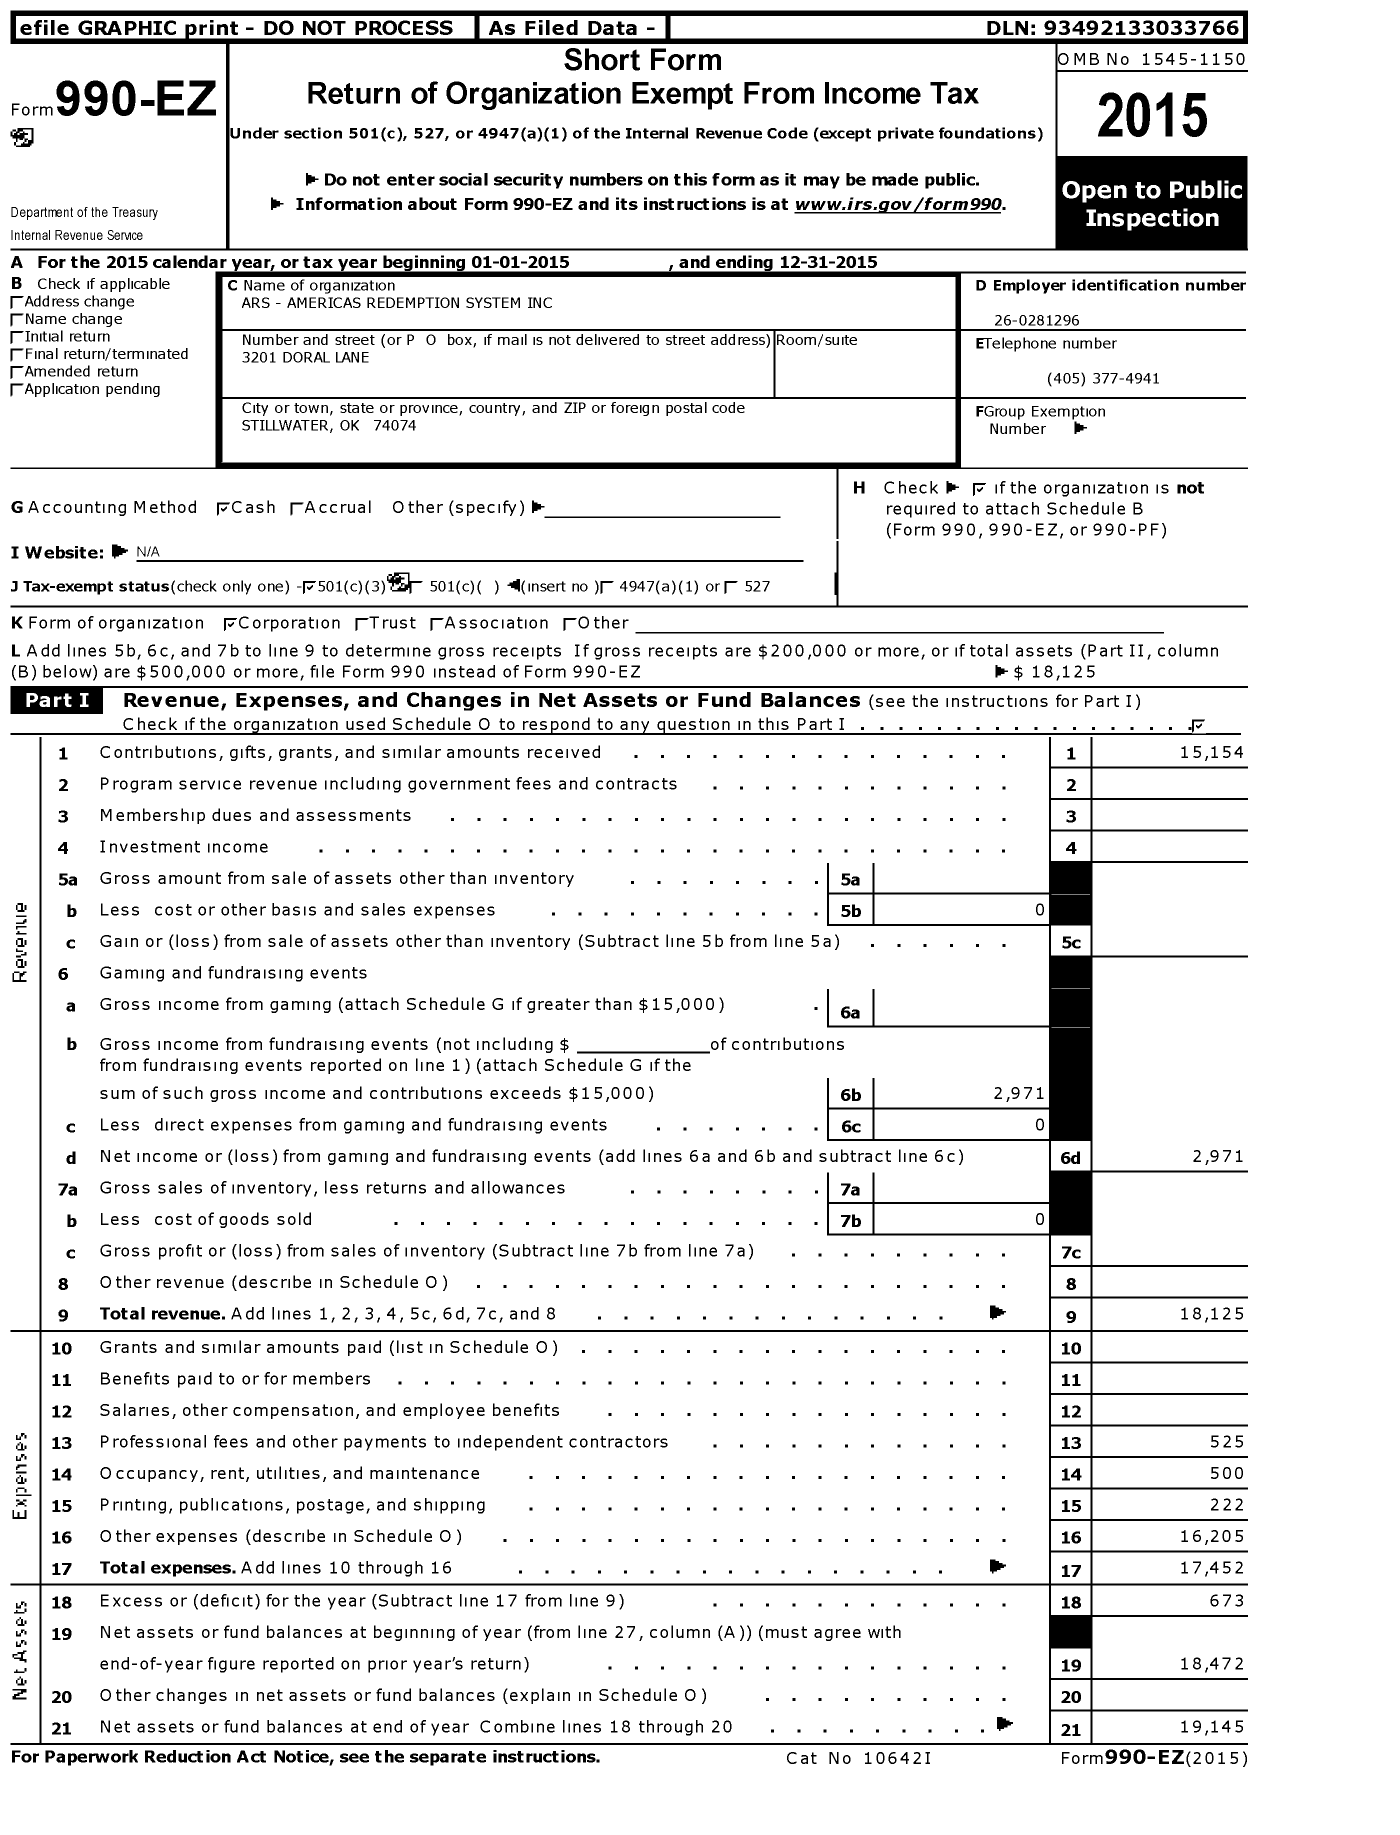 Image of first page of 2015 Form 990EZ for Ars - Americas Redemption System